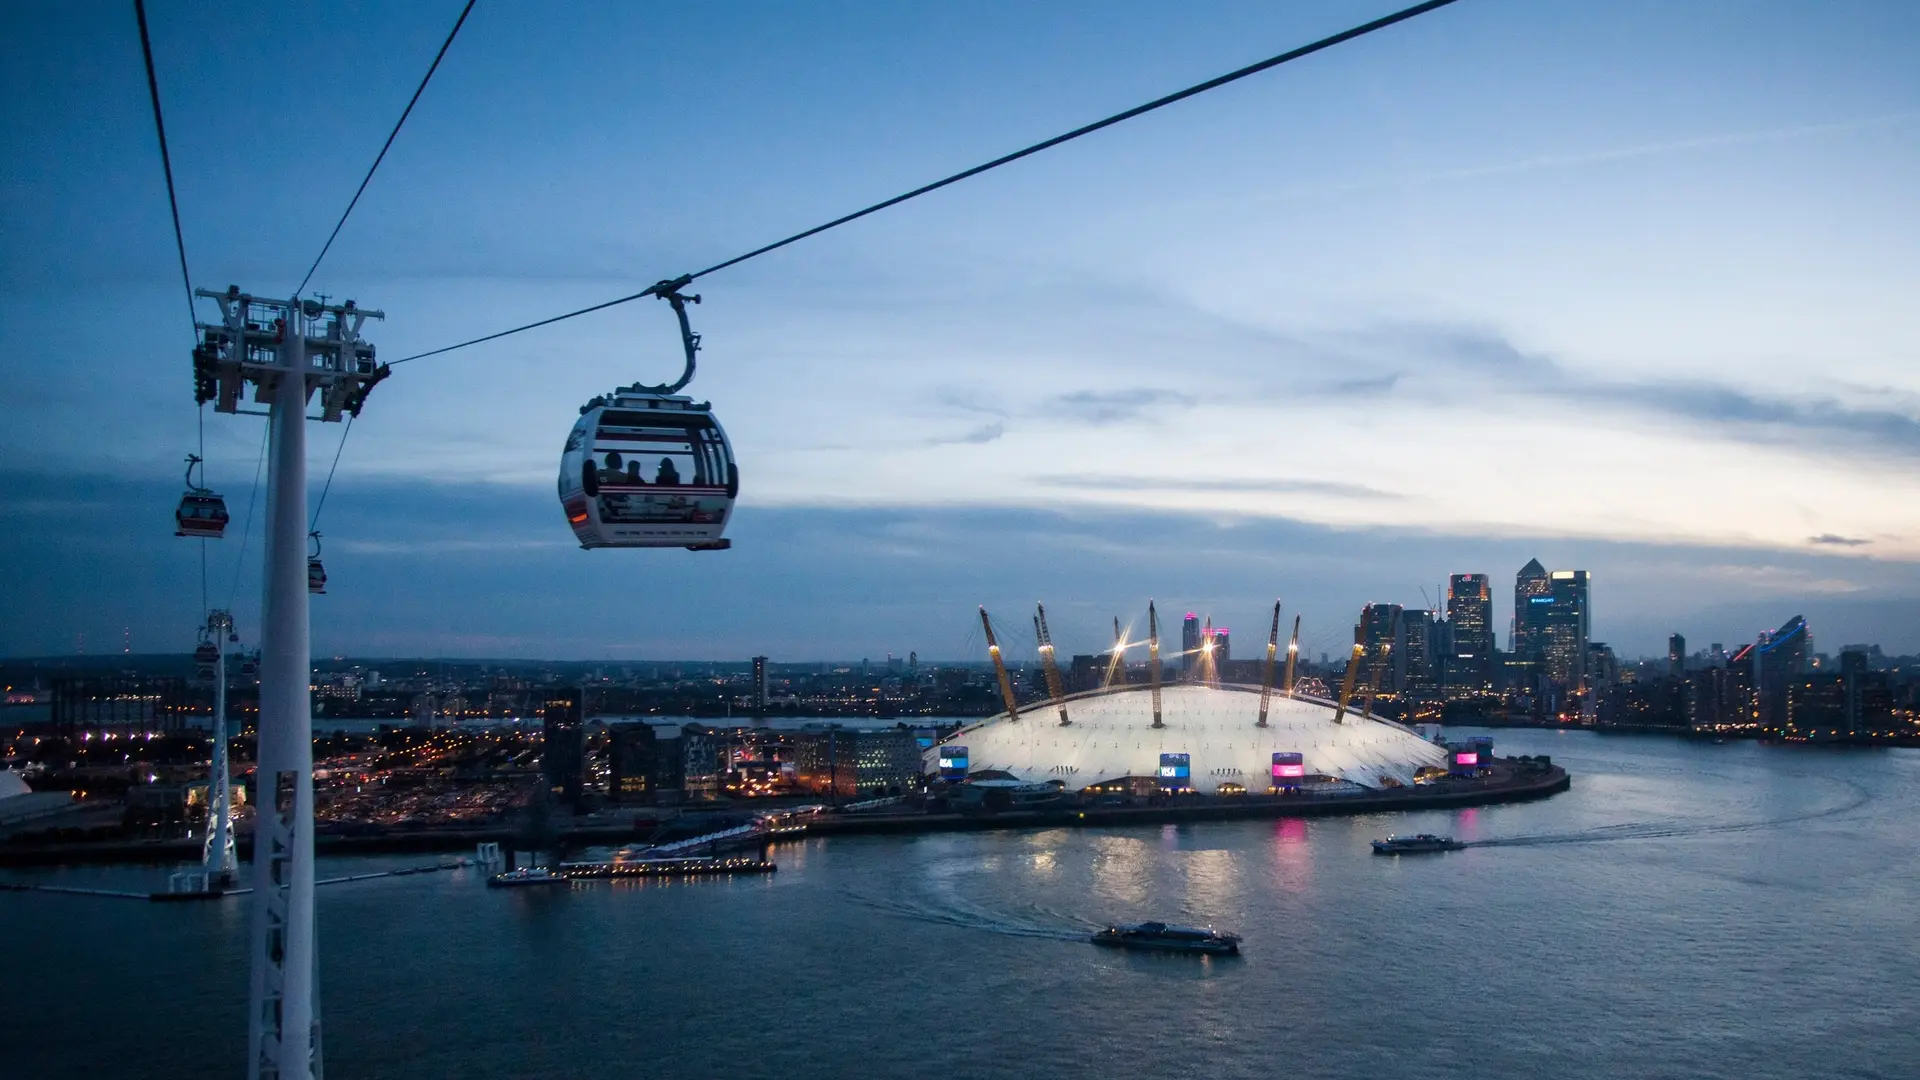 IFS Cloud Cable Car is one of the best things to do in london